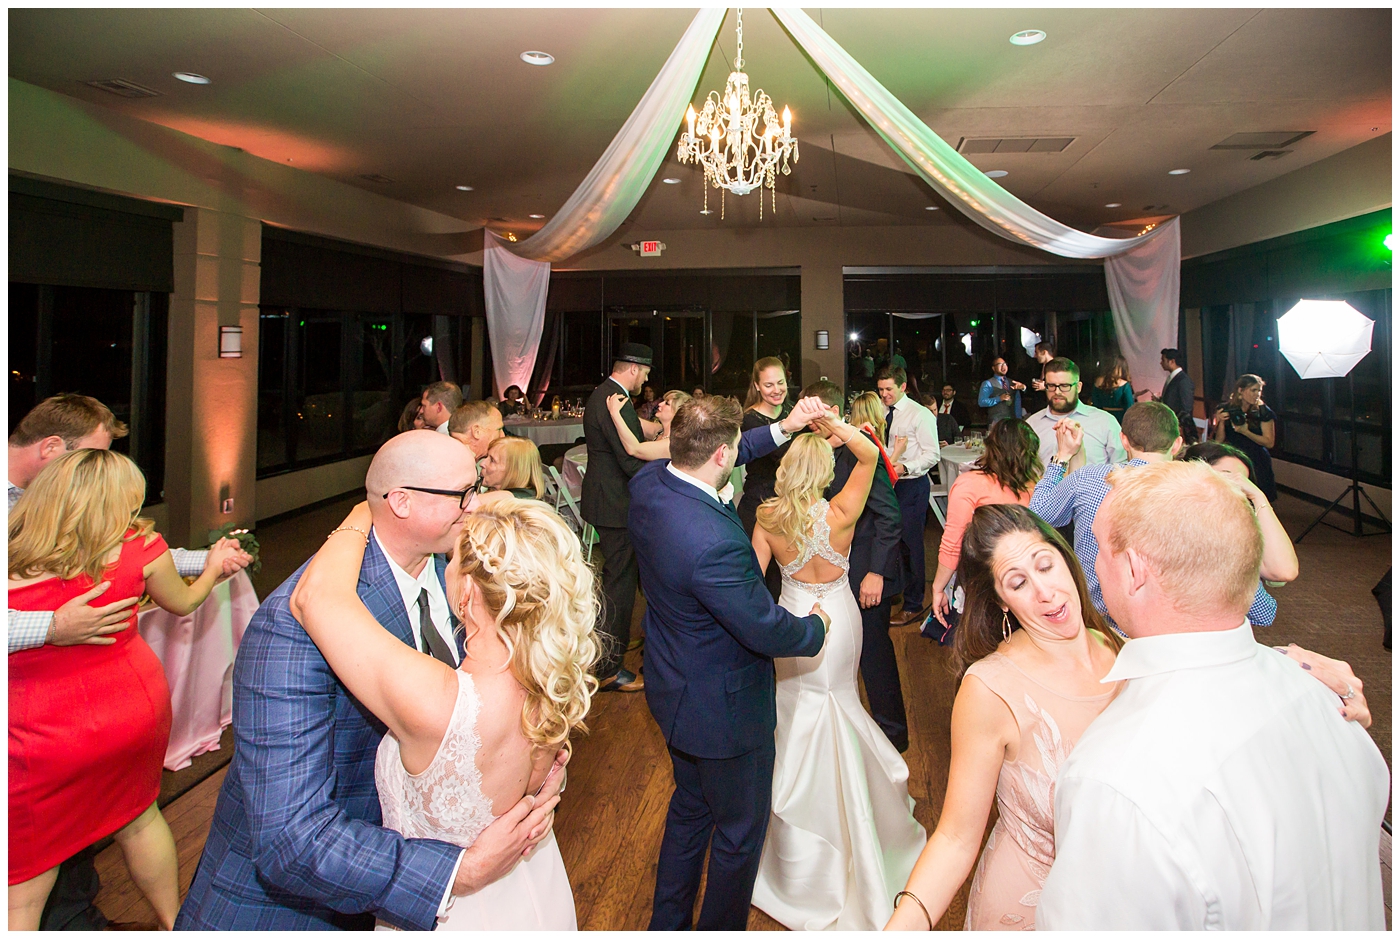 gorgeous bride with side swept hair in racerback pronovias dress and blush pink, white rose and eucalyptus greenery wedding bouquet with groom in navy suit and tie dancing at wedding reception in ballroom